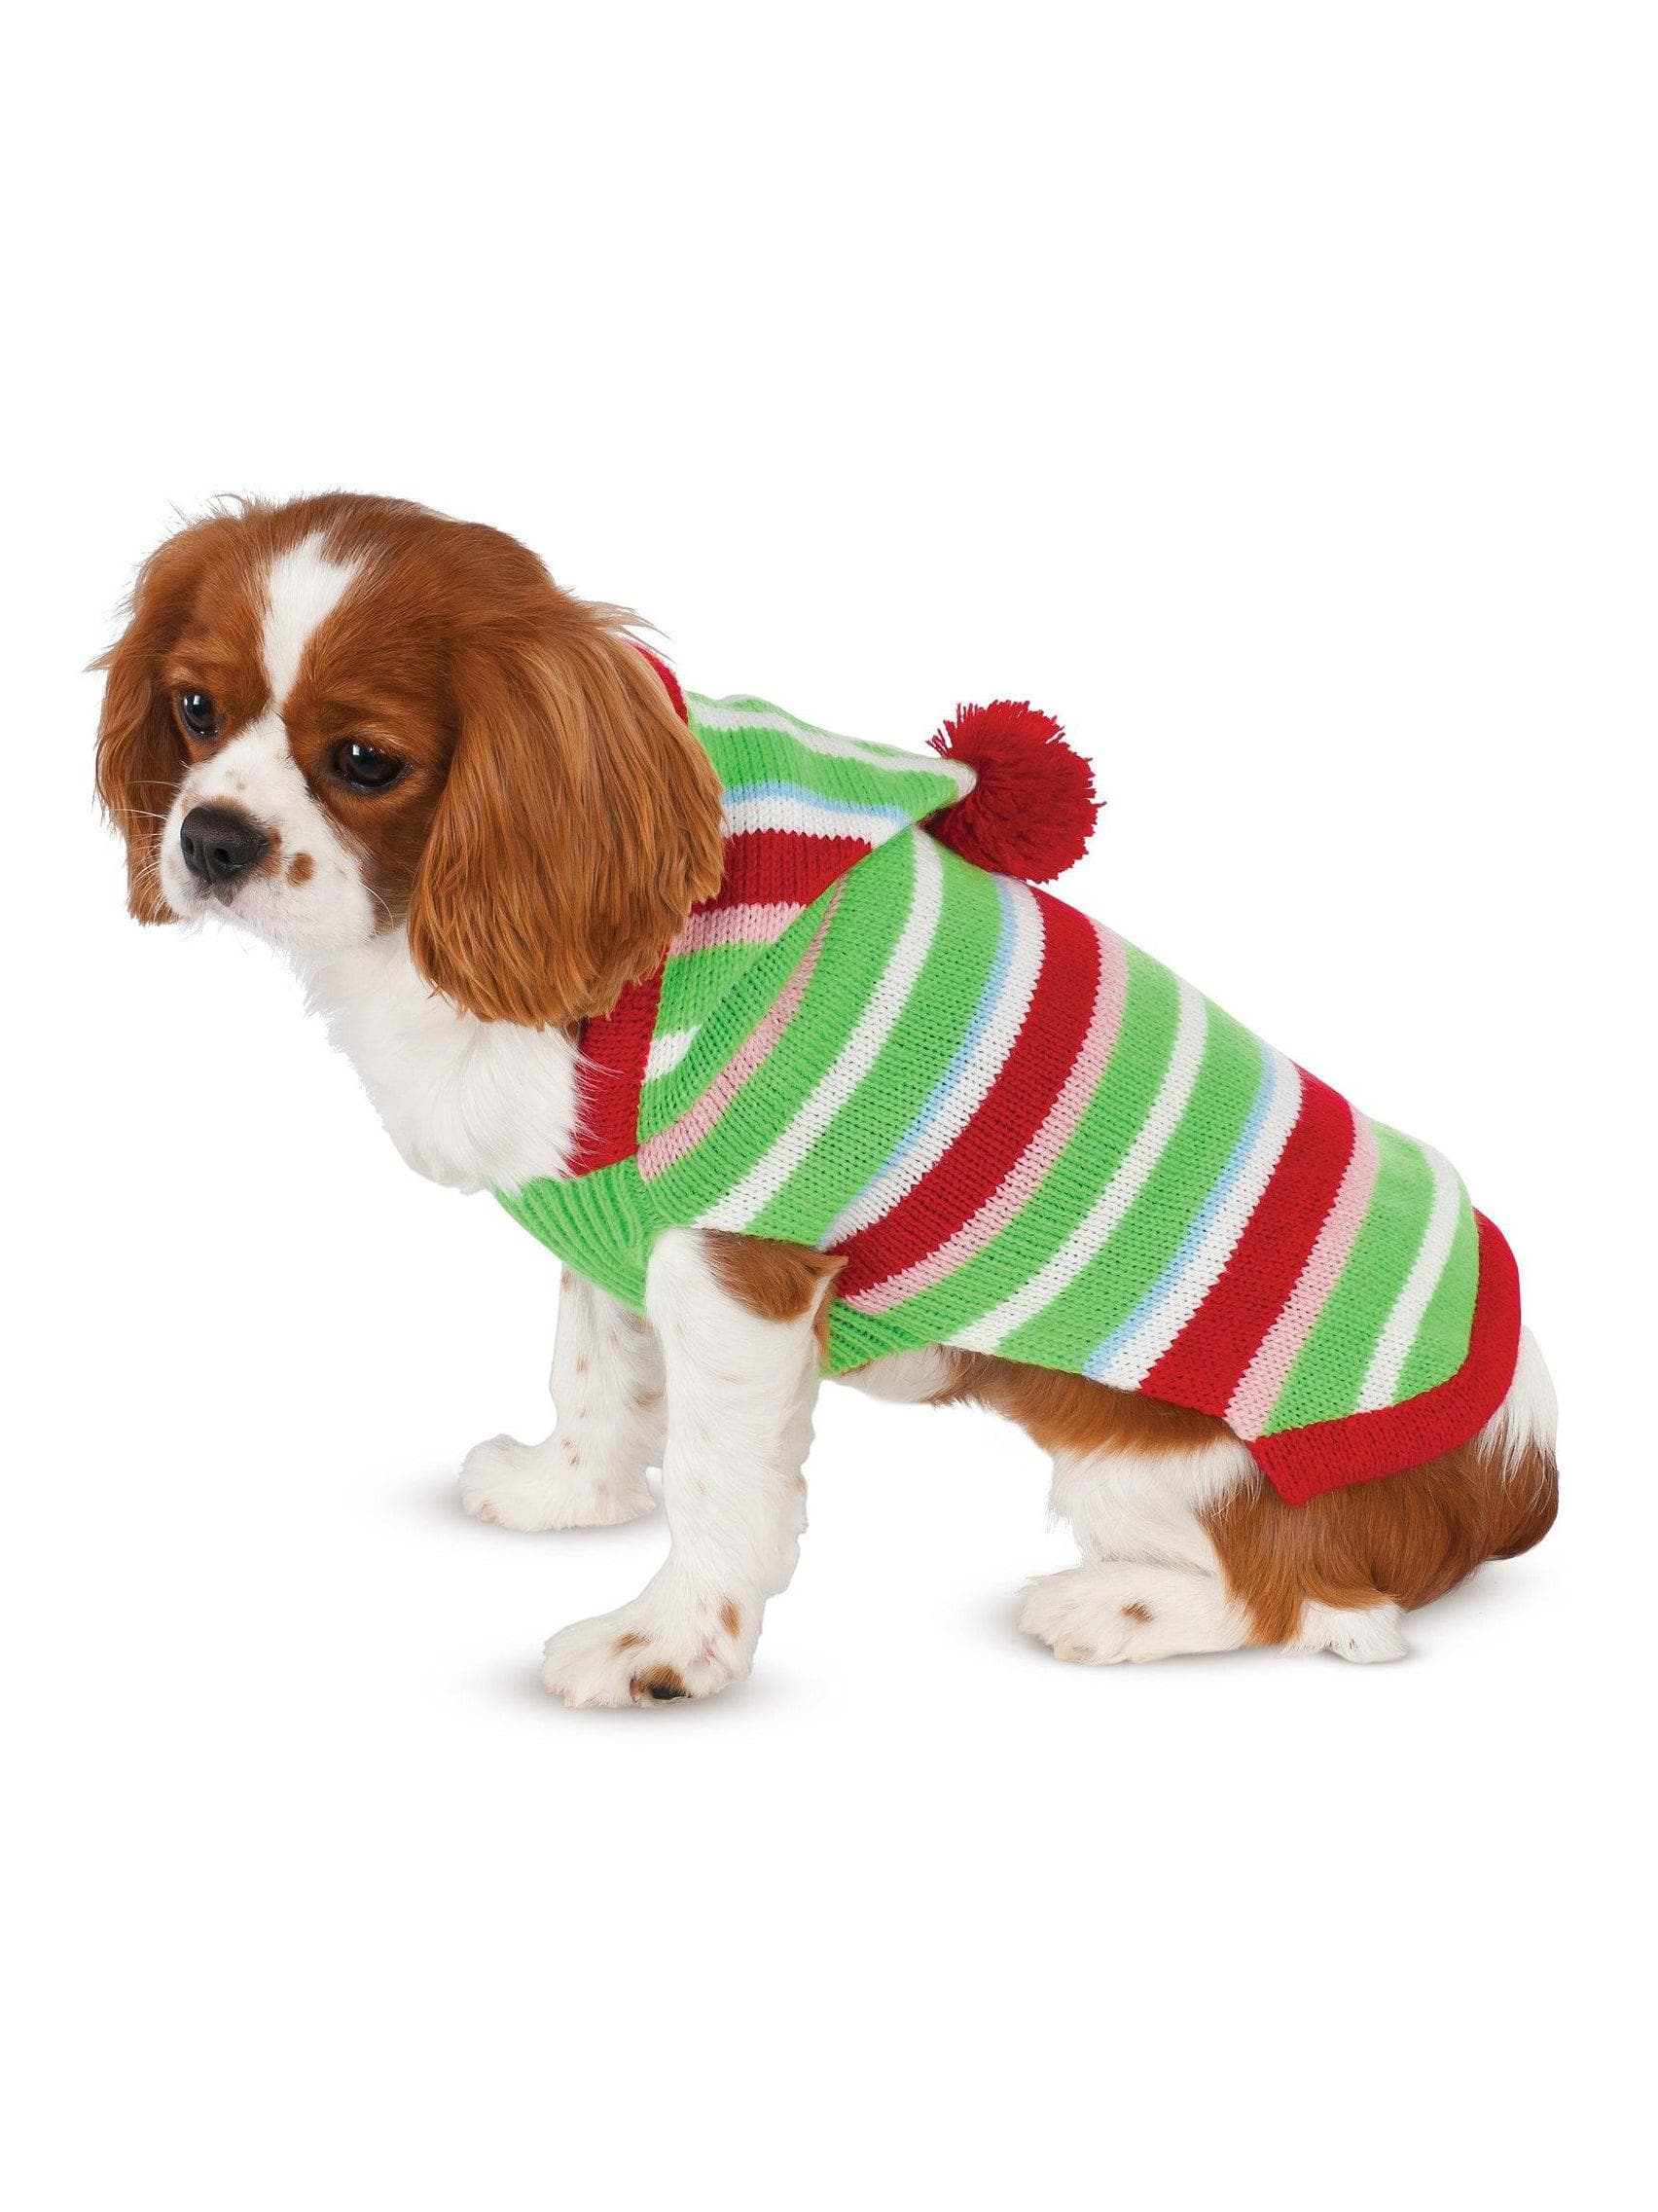 Pet Candy Striped Sweater Costume - costumes.com